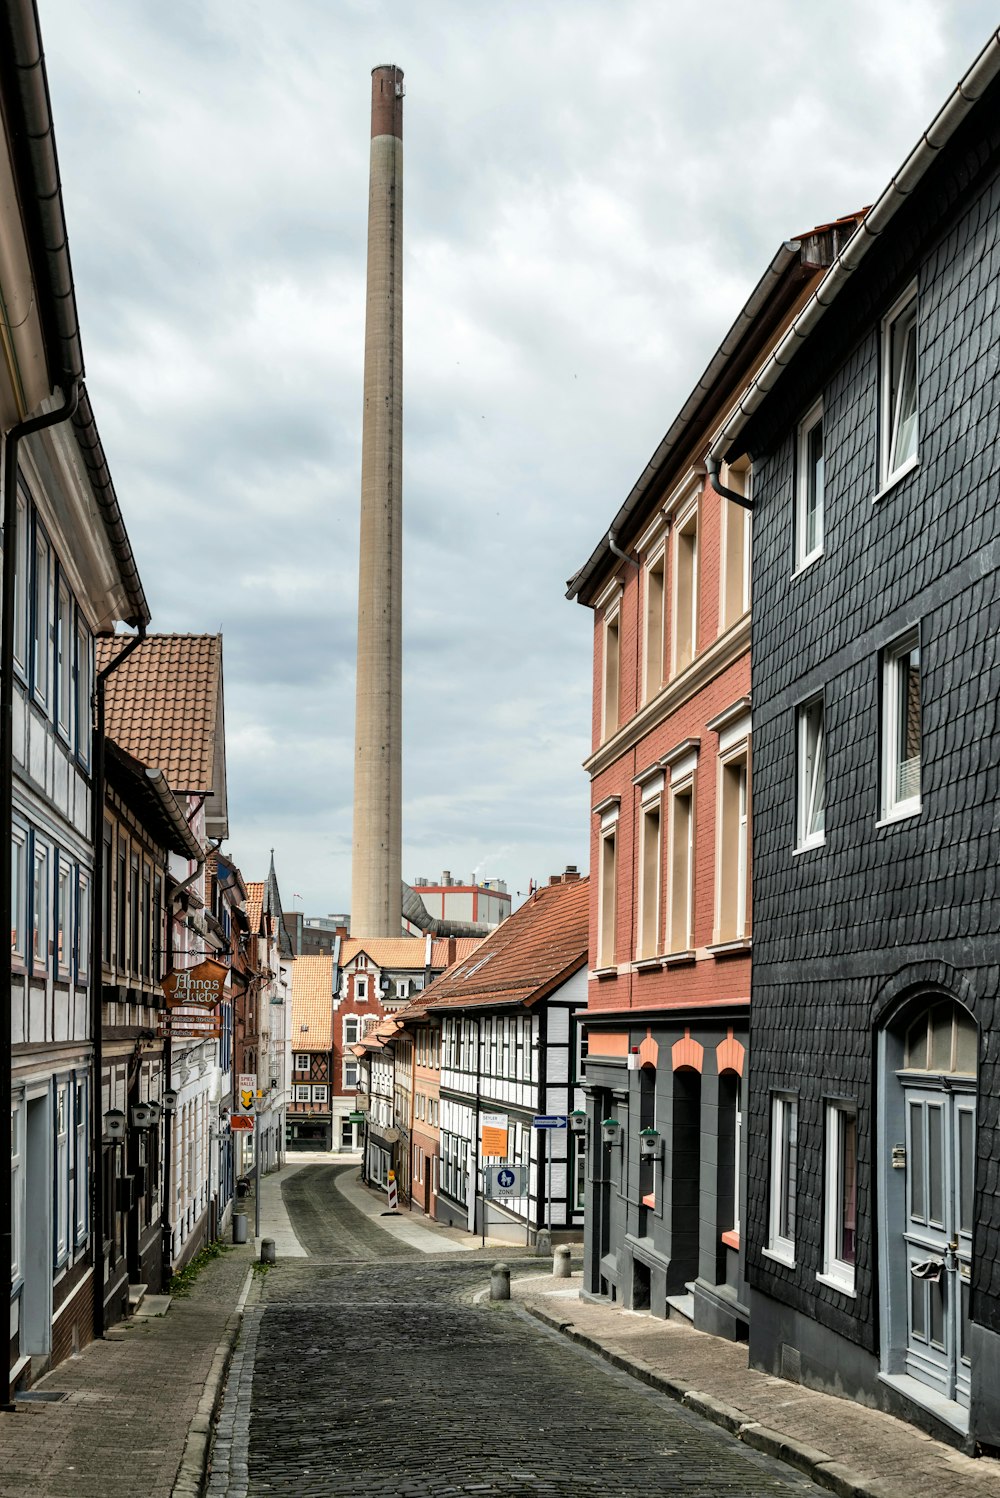 a street lined with buildings and a tall tower in the distance